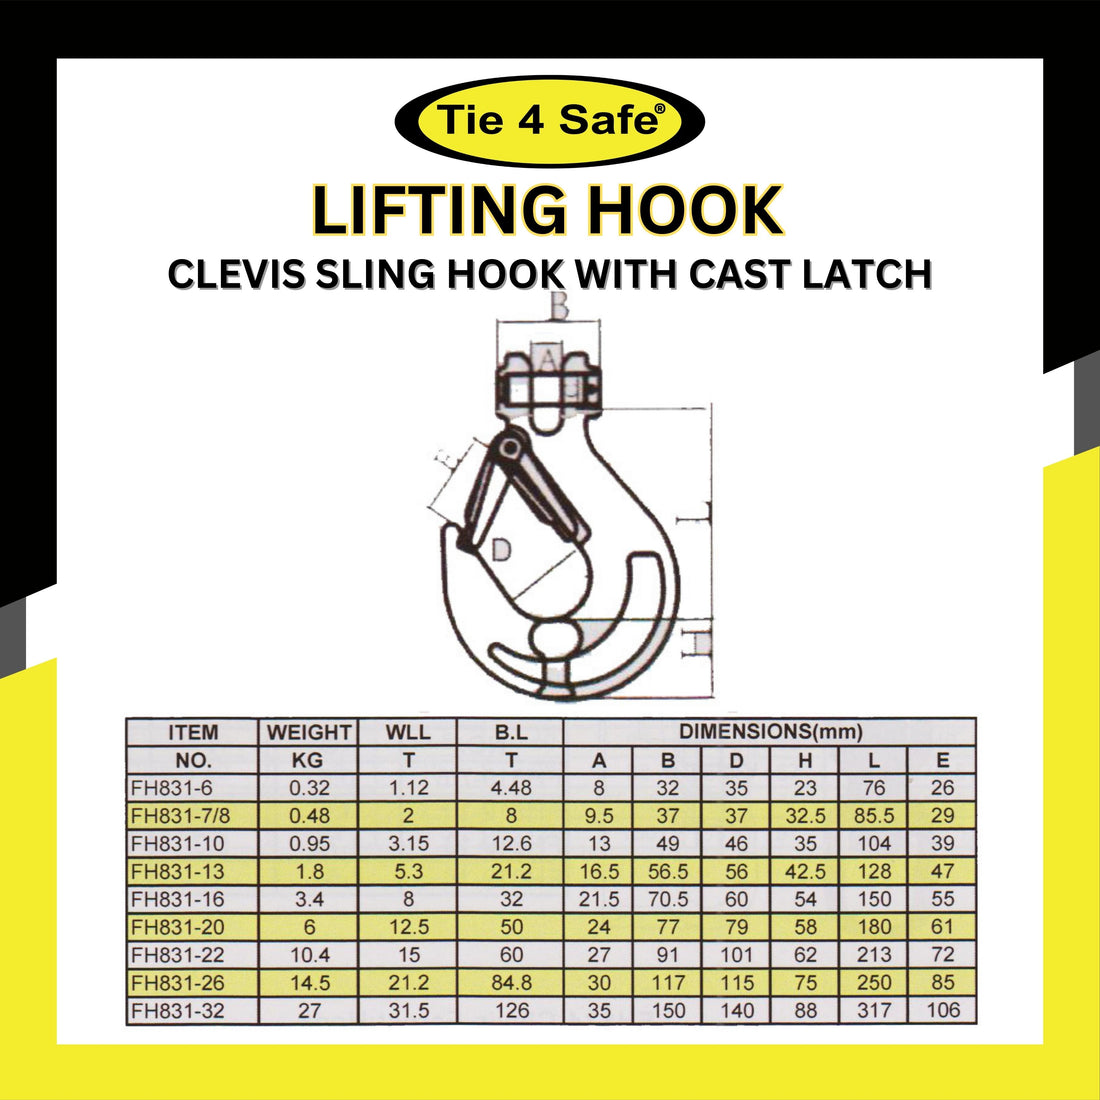 Clevis Sling Hook With Cast Latch